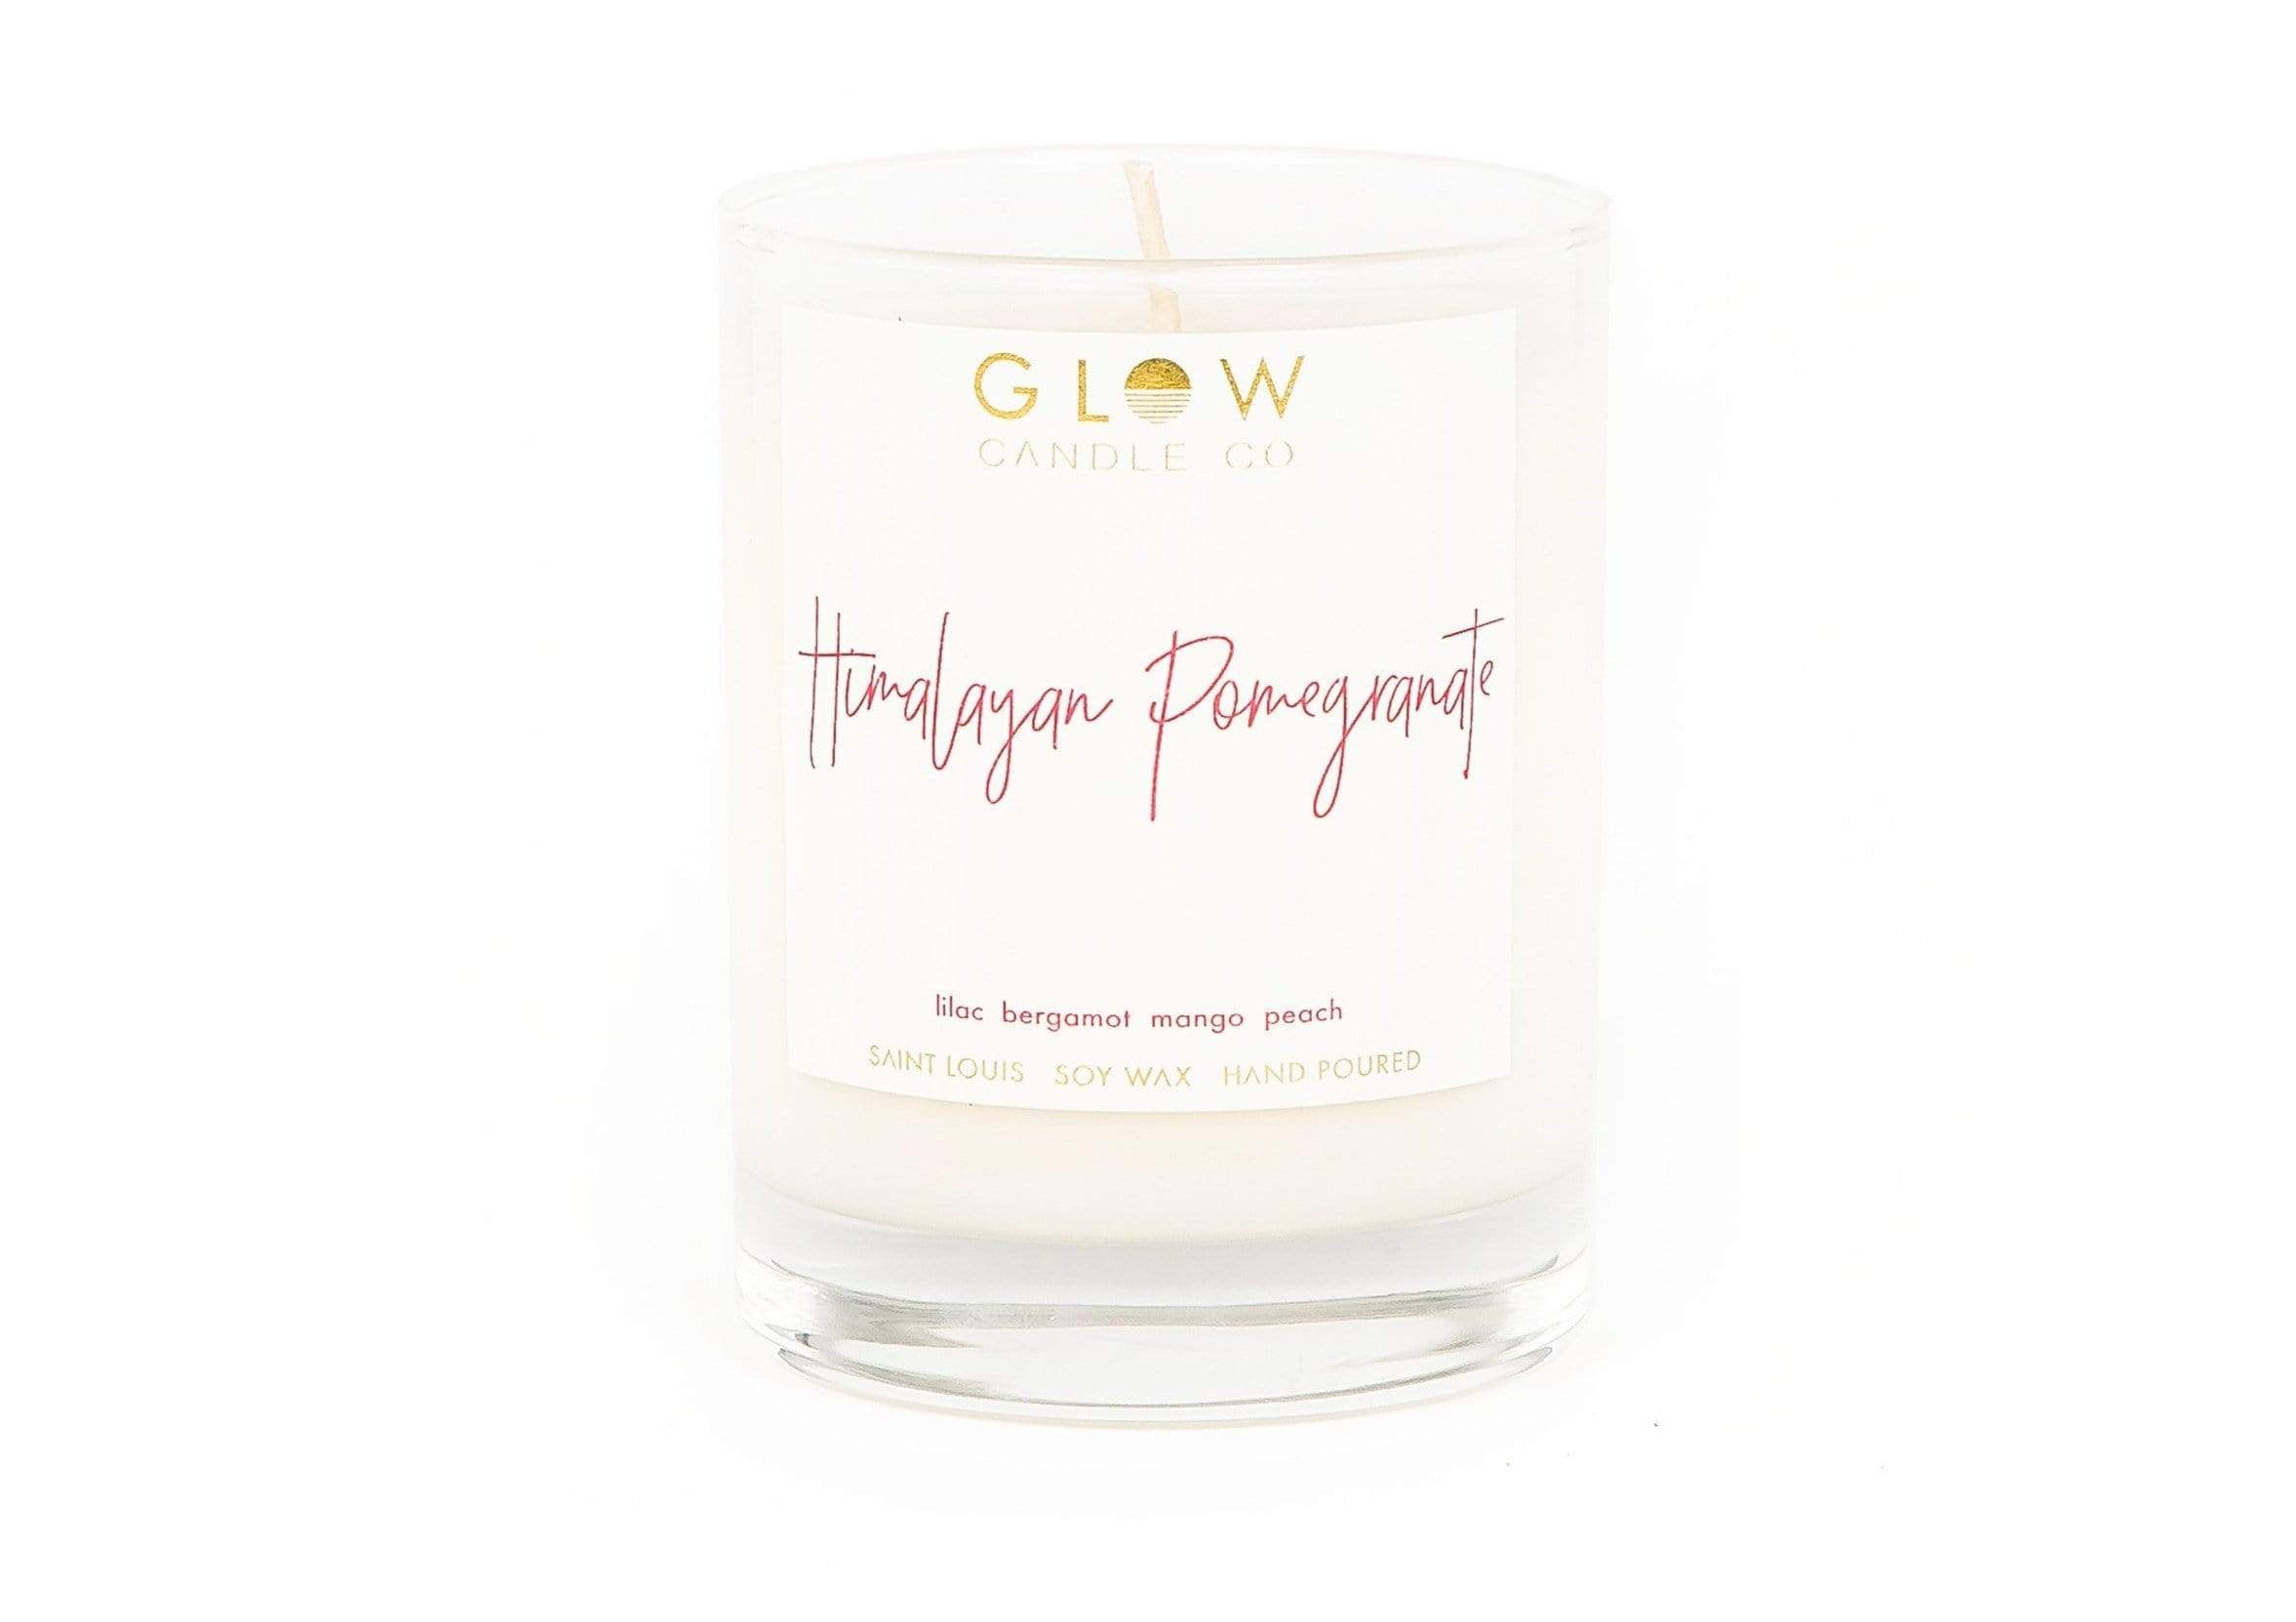  Himalayan Pomegranate Candle Glow Candle Company Perfumarie